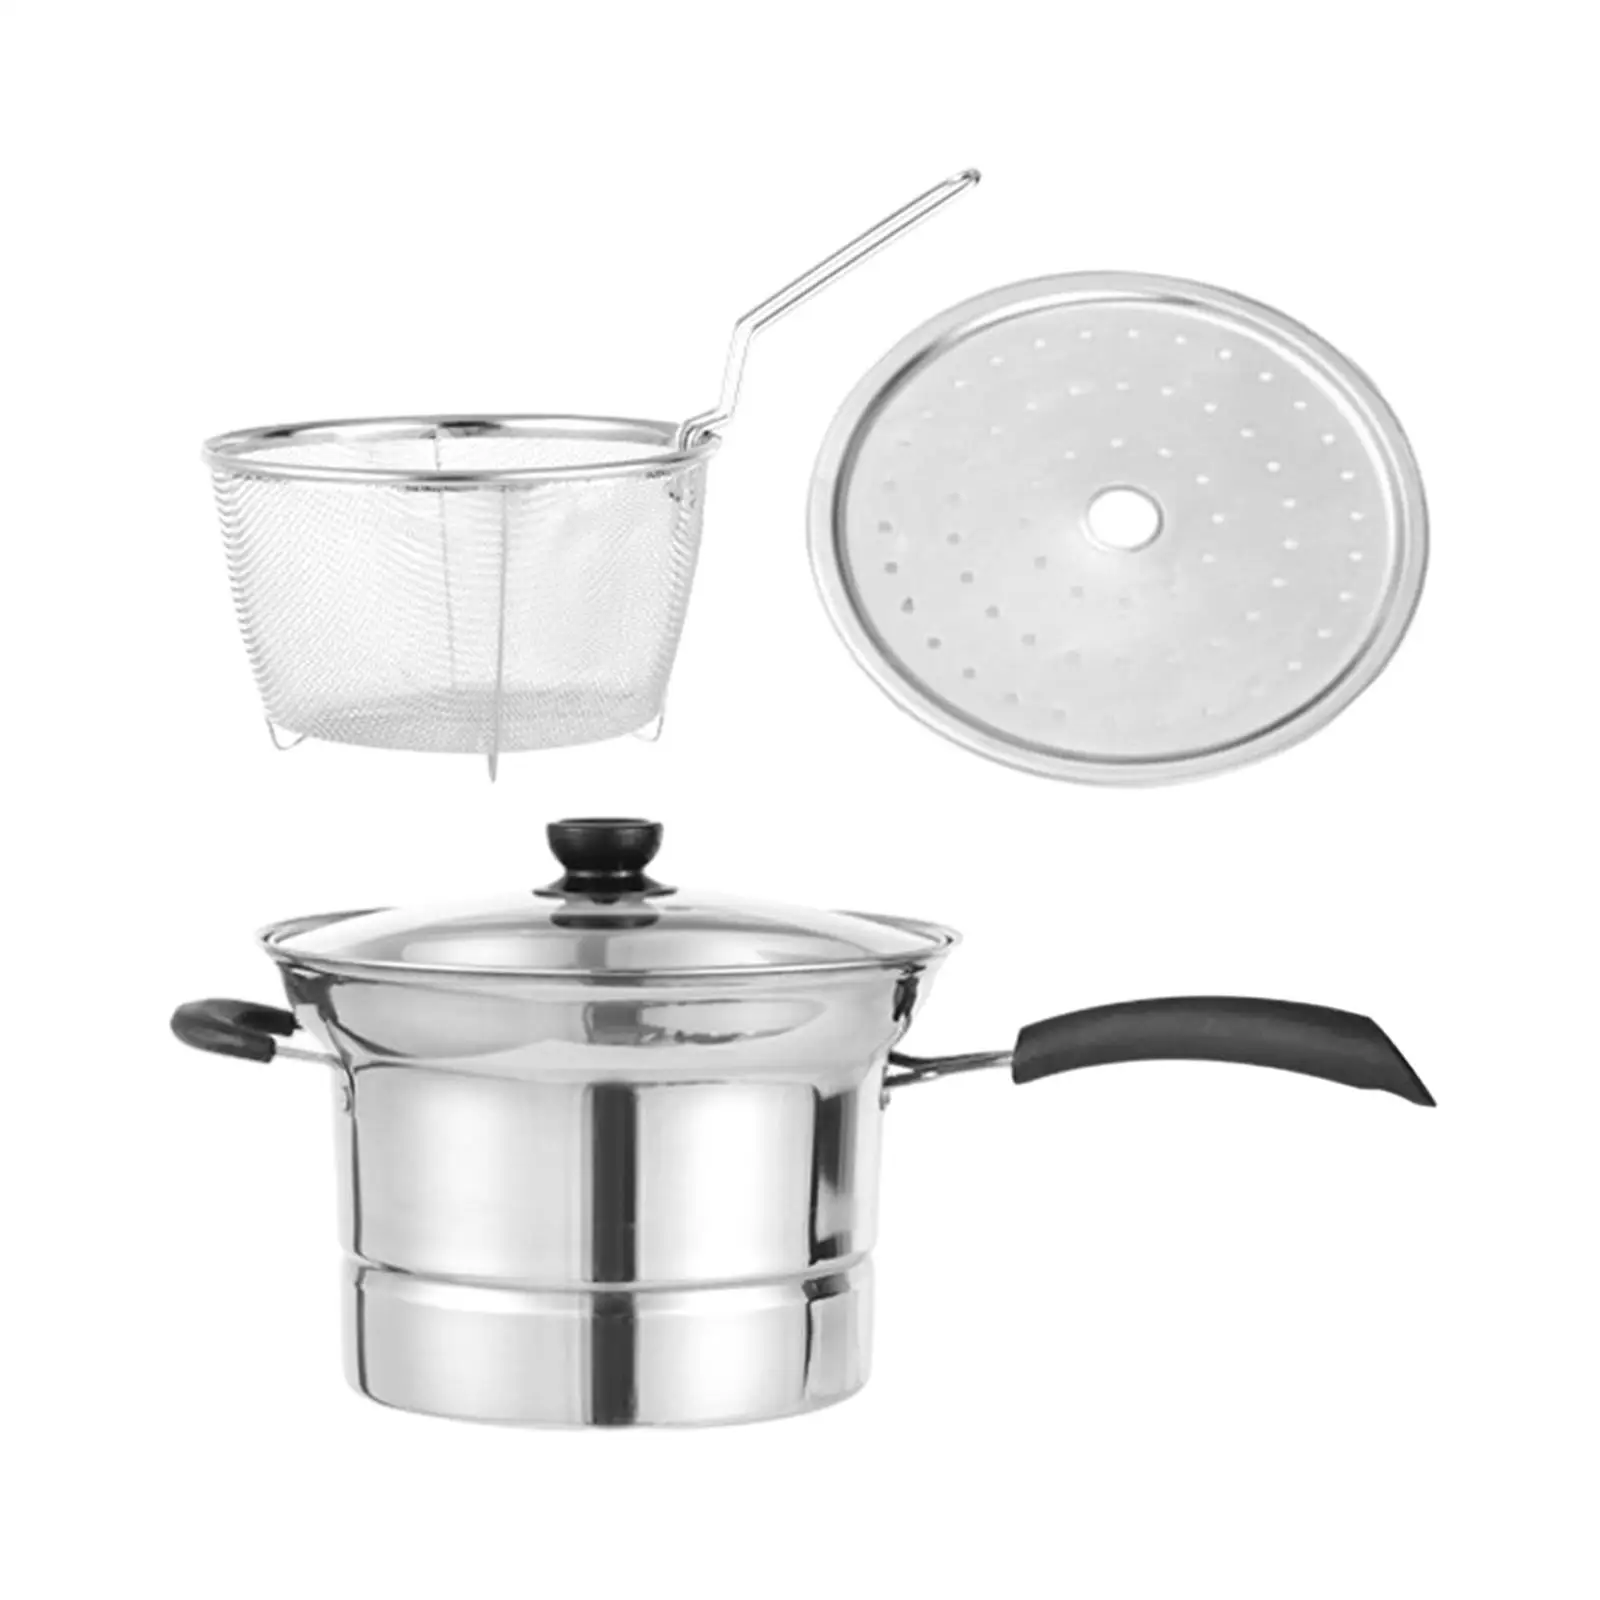 Deep Fryer Pot Soup Pot Steaming Boiling Pot Kitchenware Cooking Tool Cooking Pot for Camping Party Home Restaurant Dining Room